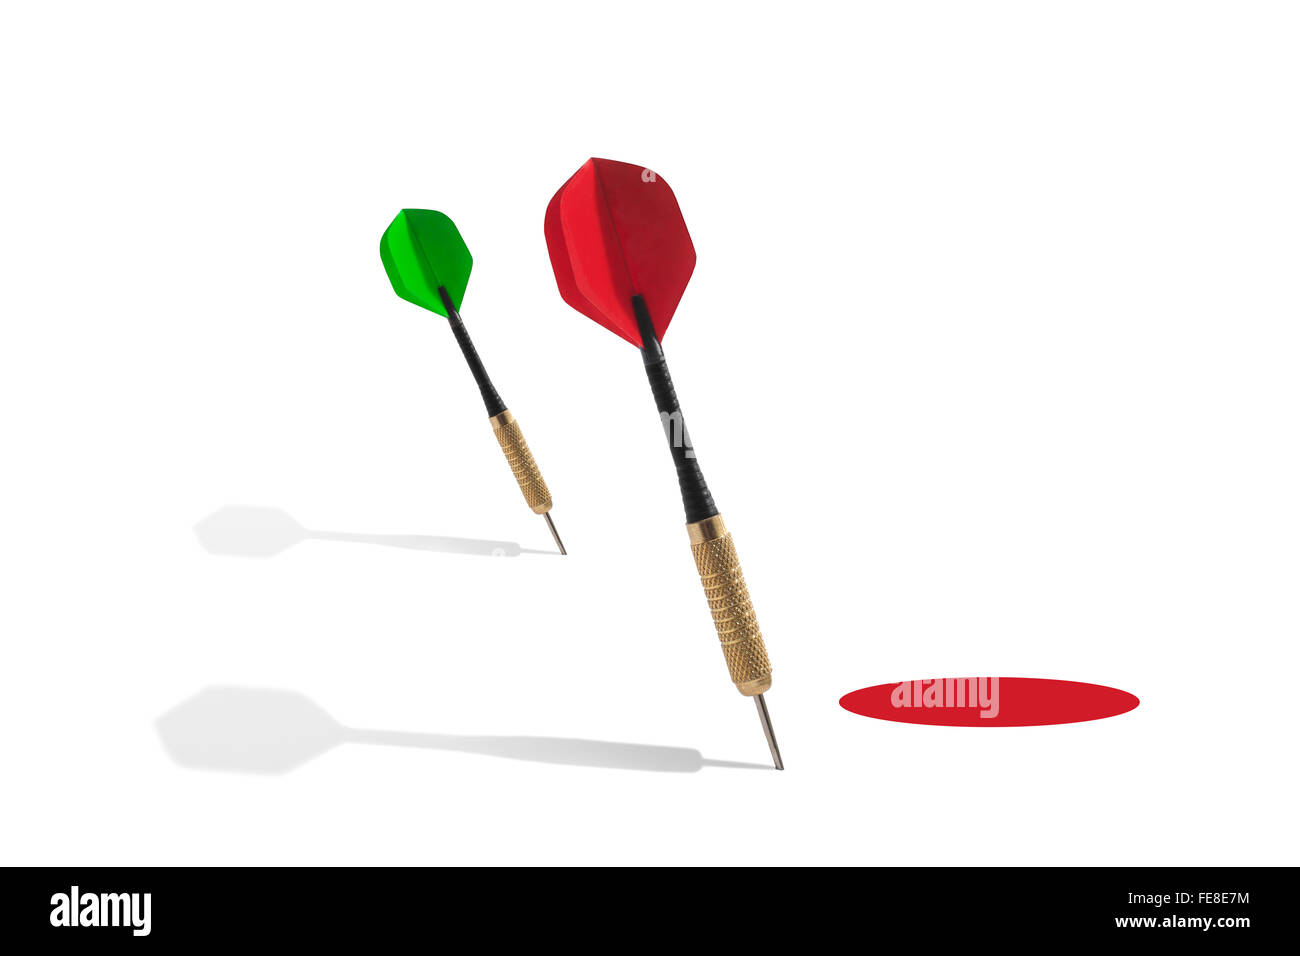 Darts Outside of a Red Target on a White Background Stock Photo